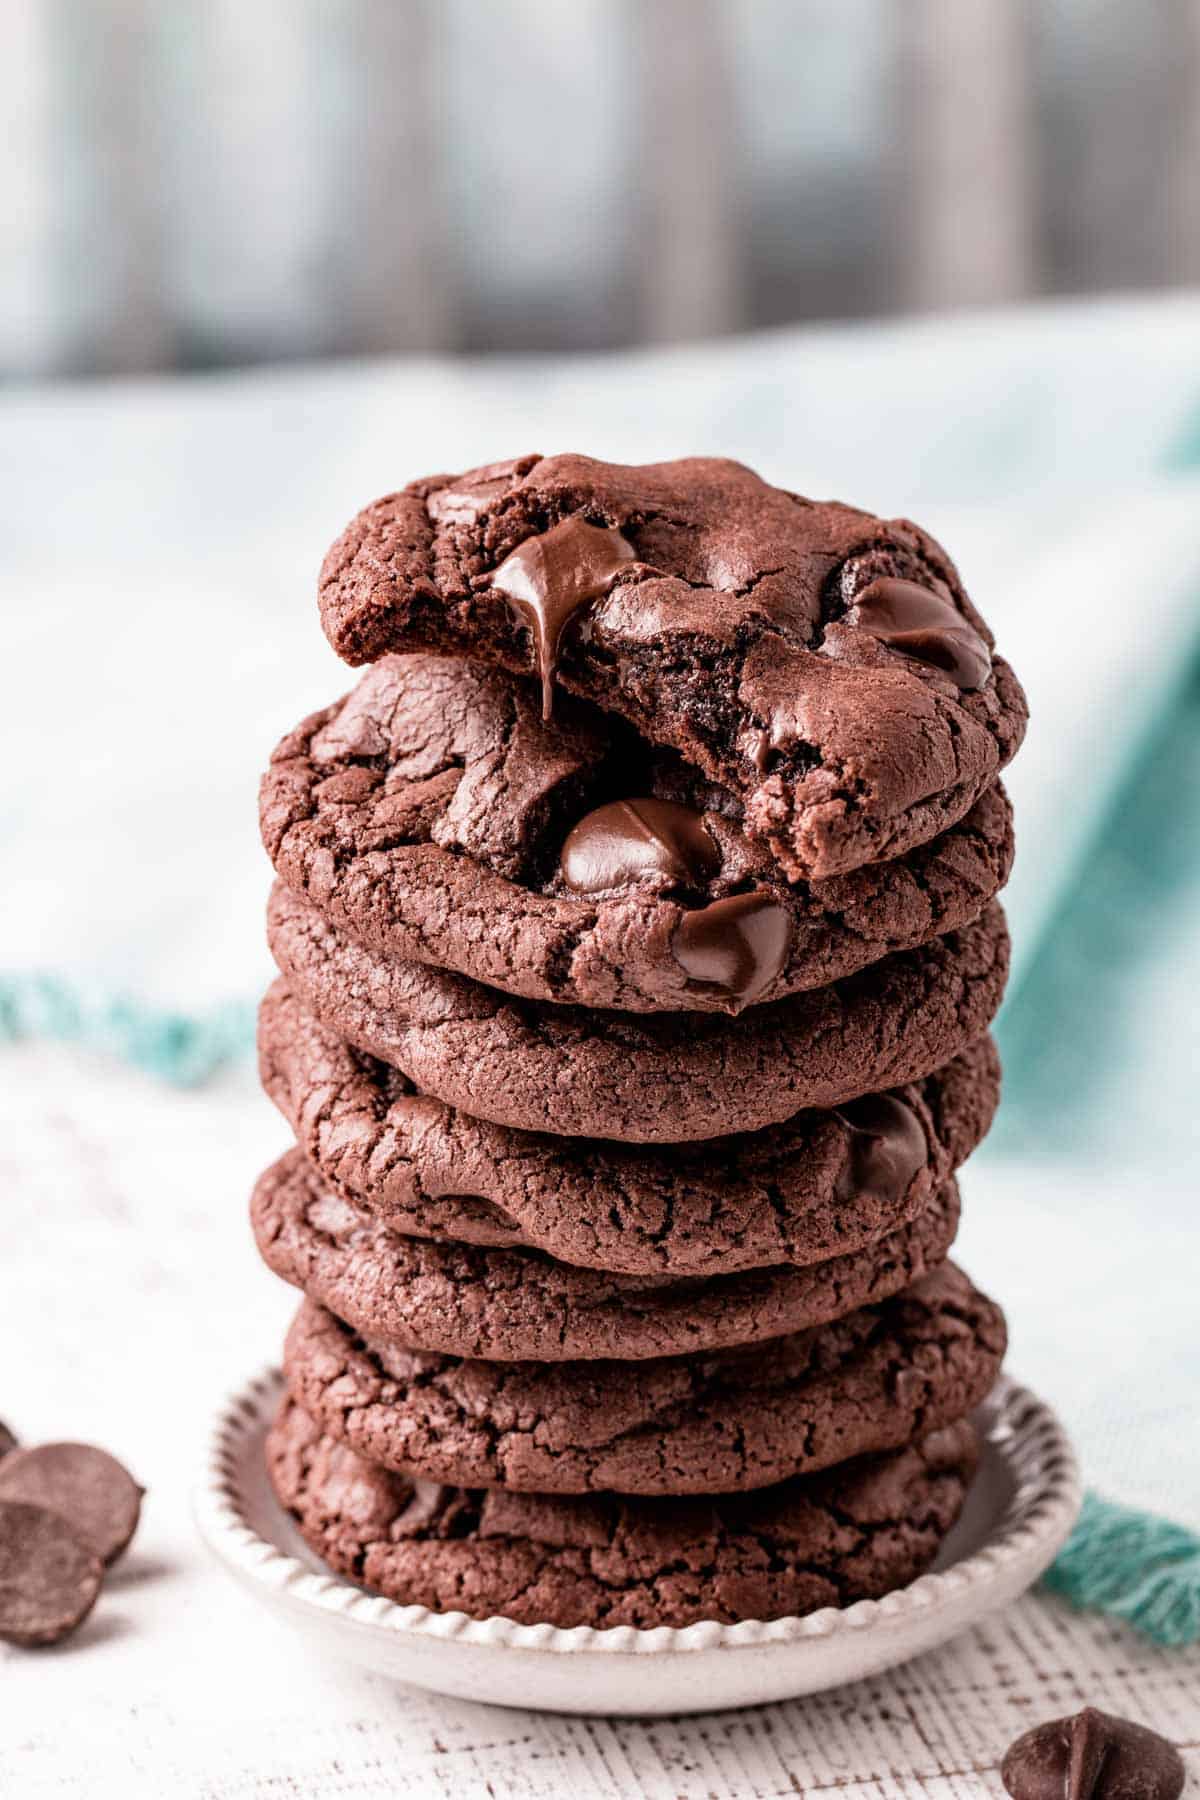 A stack of gluten-free double chocolate cookies.  The top cookie is half eaten. There is a chocolate drip falling from one of the chocolate chips.